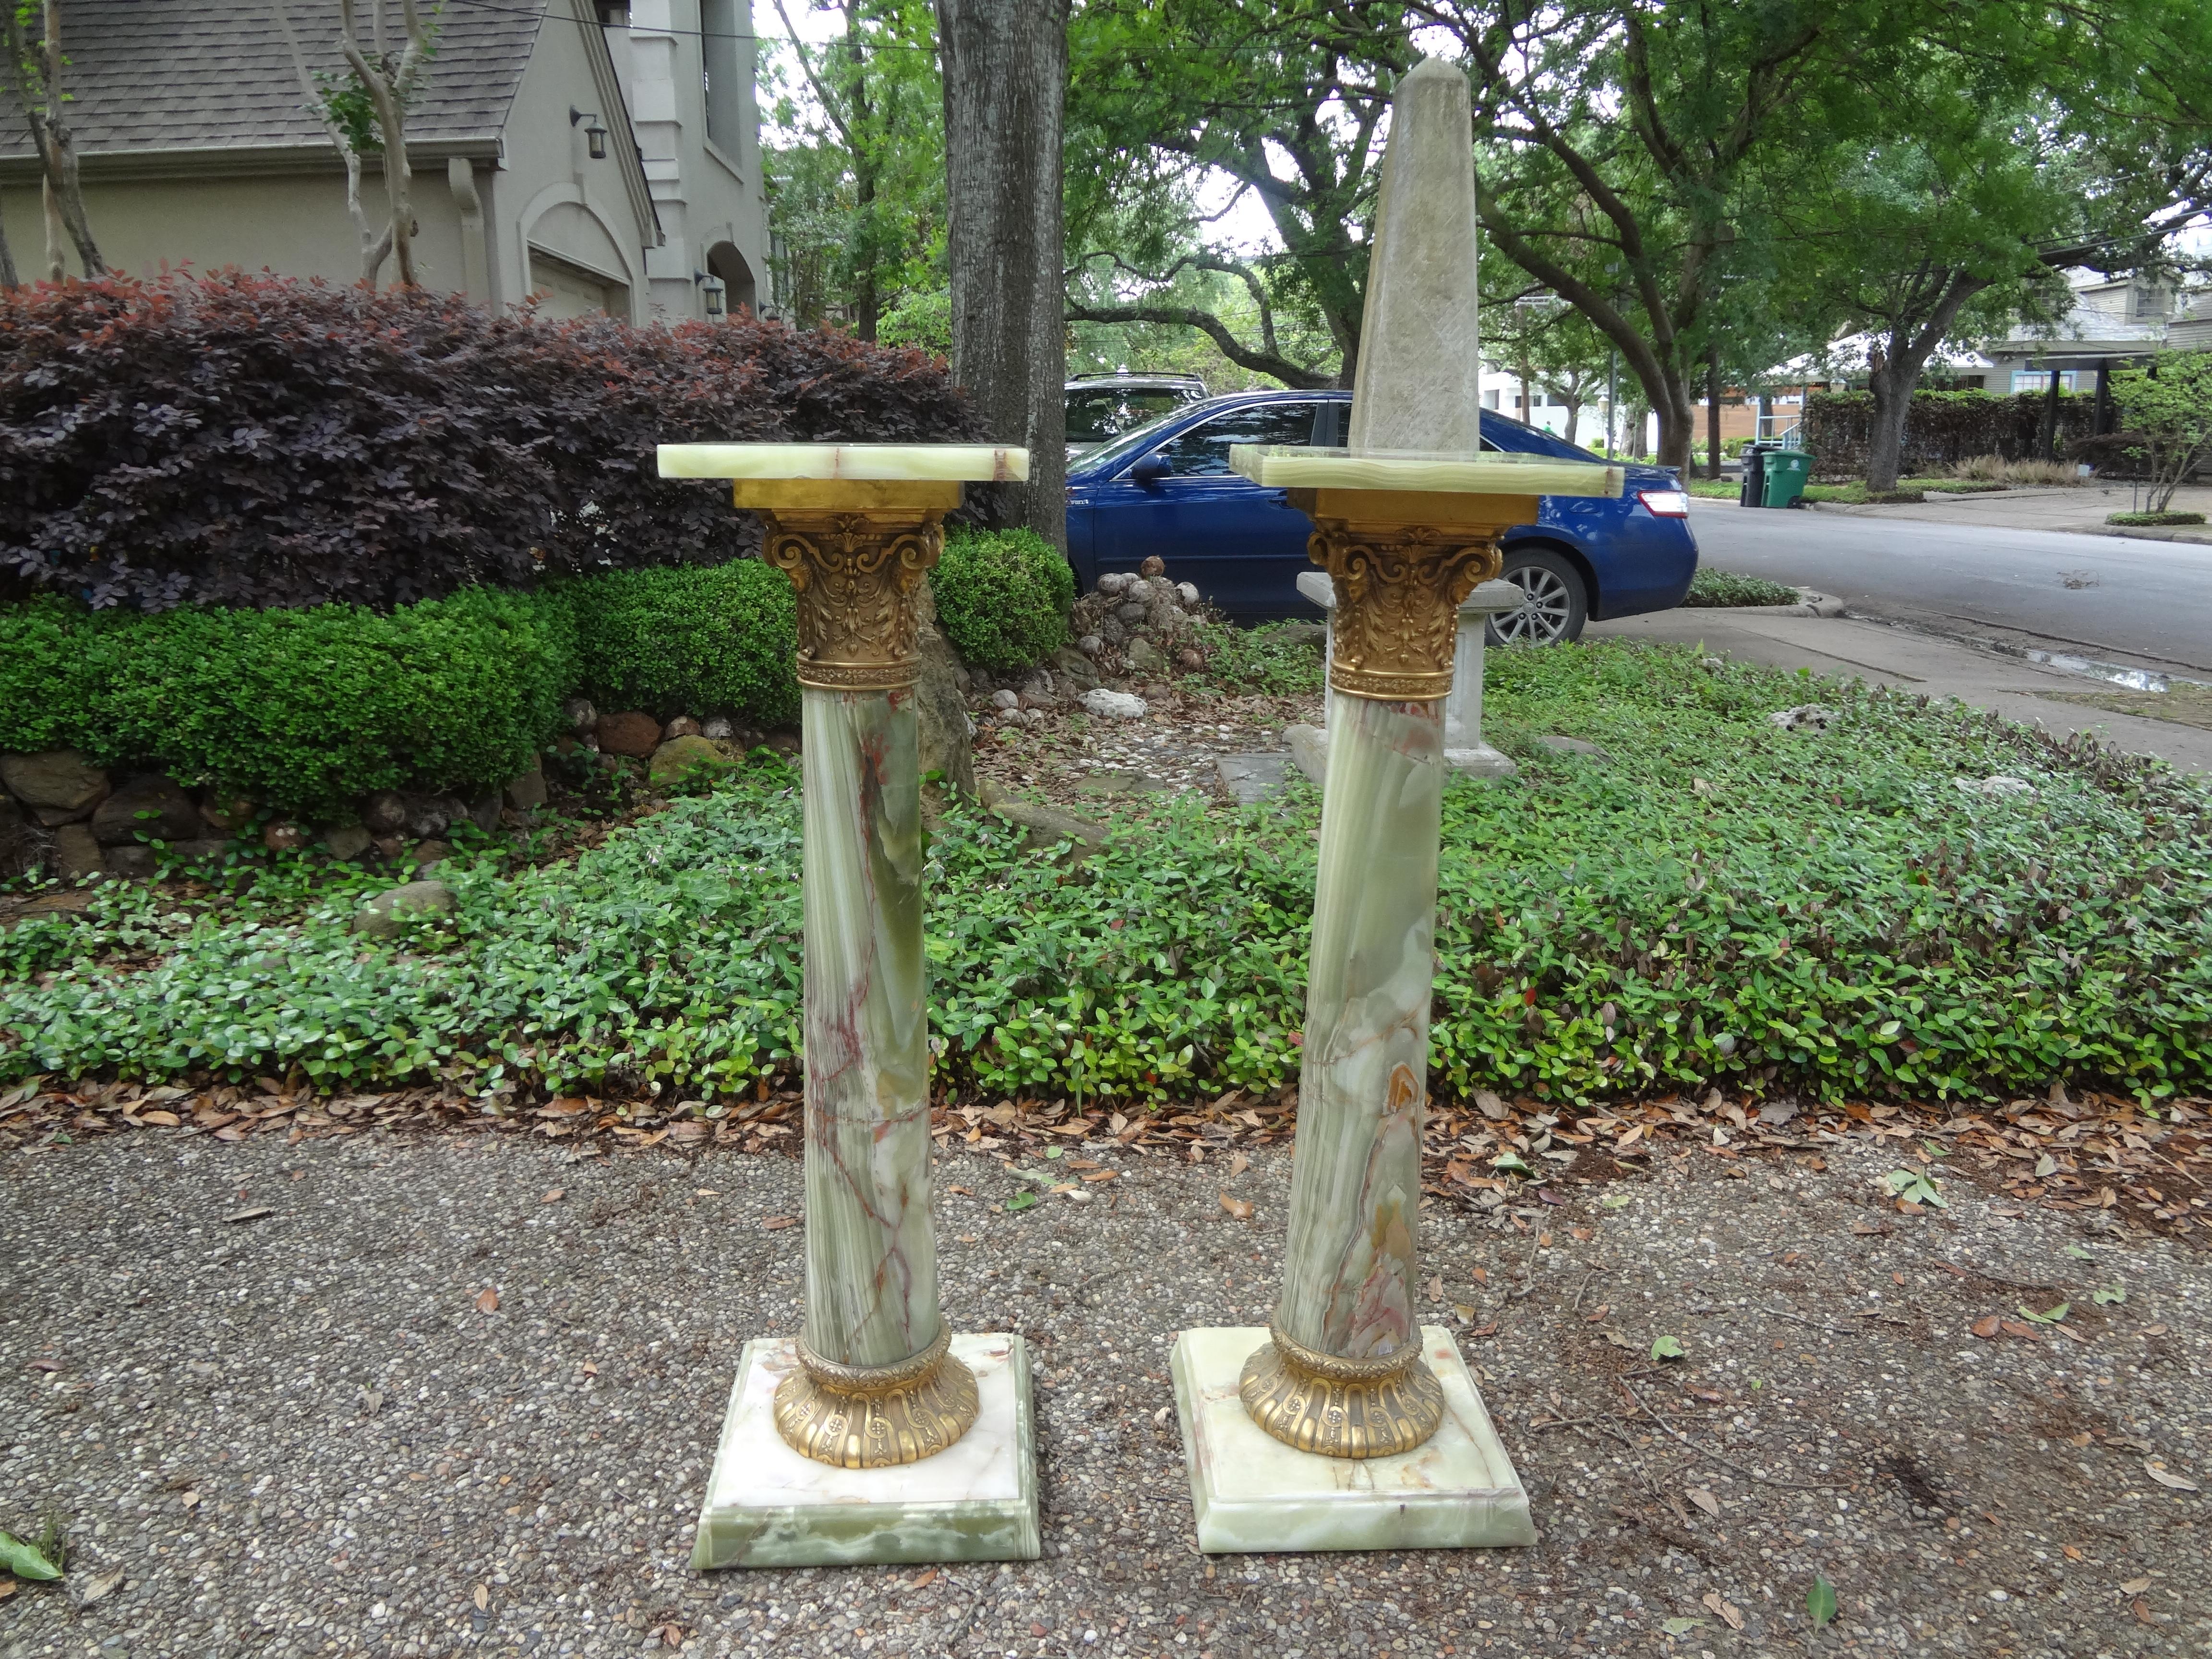 Stunning pair of 19th century French neoclassical style onyx and bronze pedestals. These fantastic antique French pedestals are
Made from green slab onyx in the form of stylized columns with Corinthian capitals. These pedestals have a large square